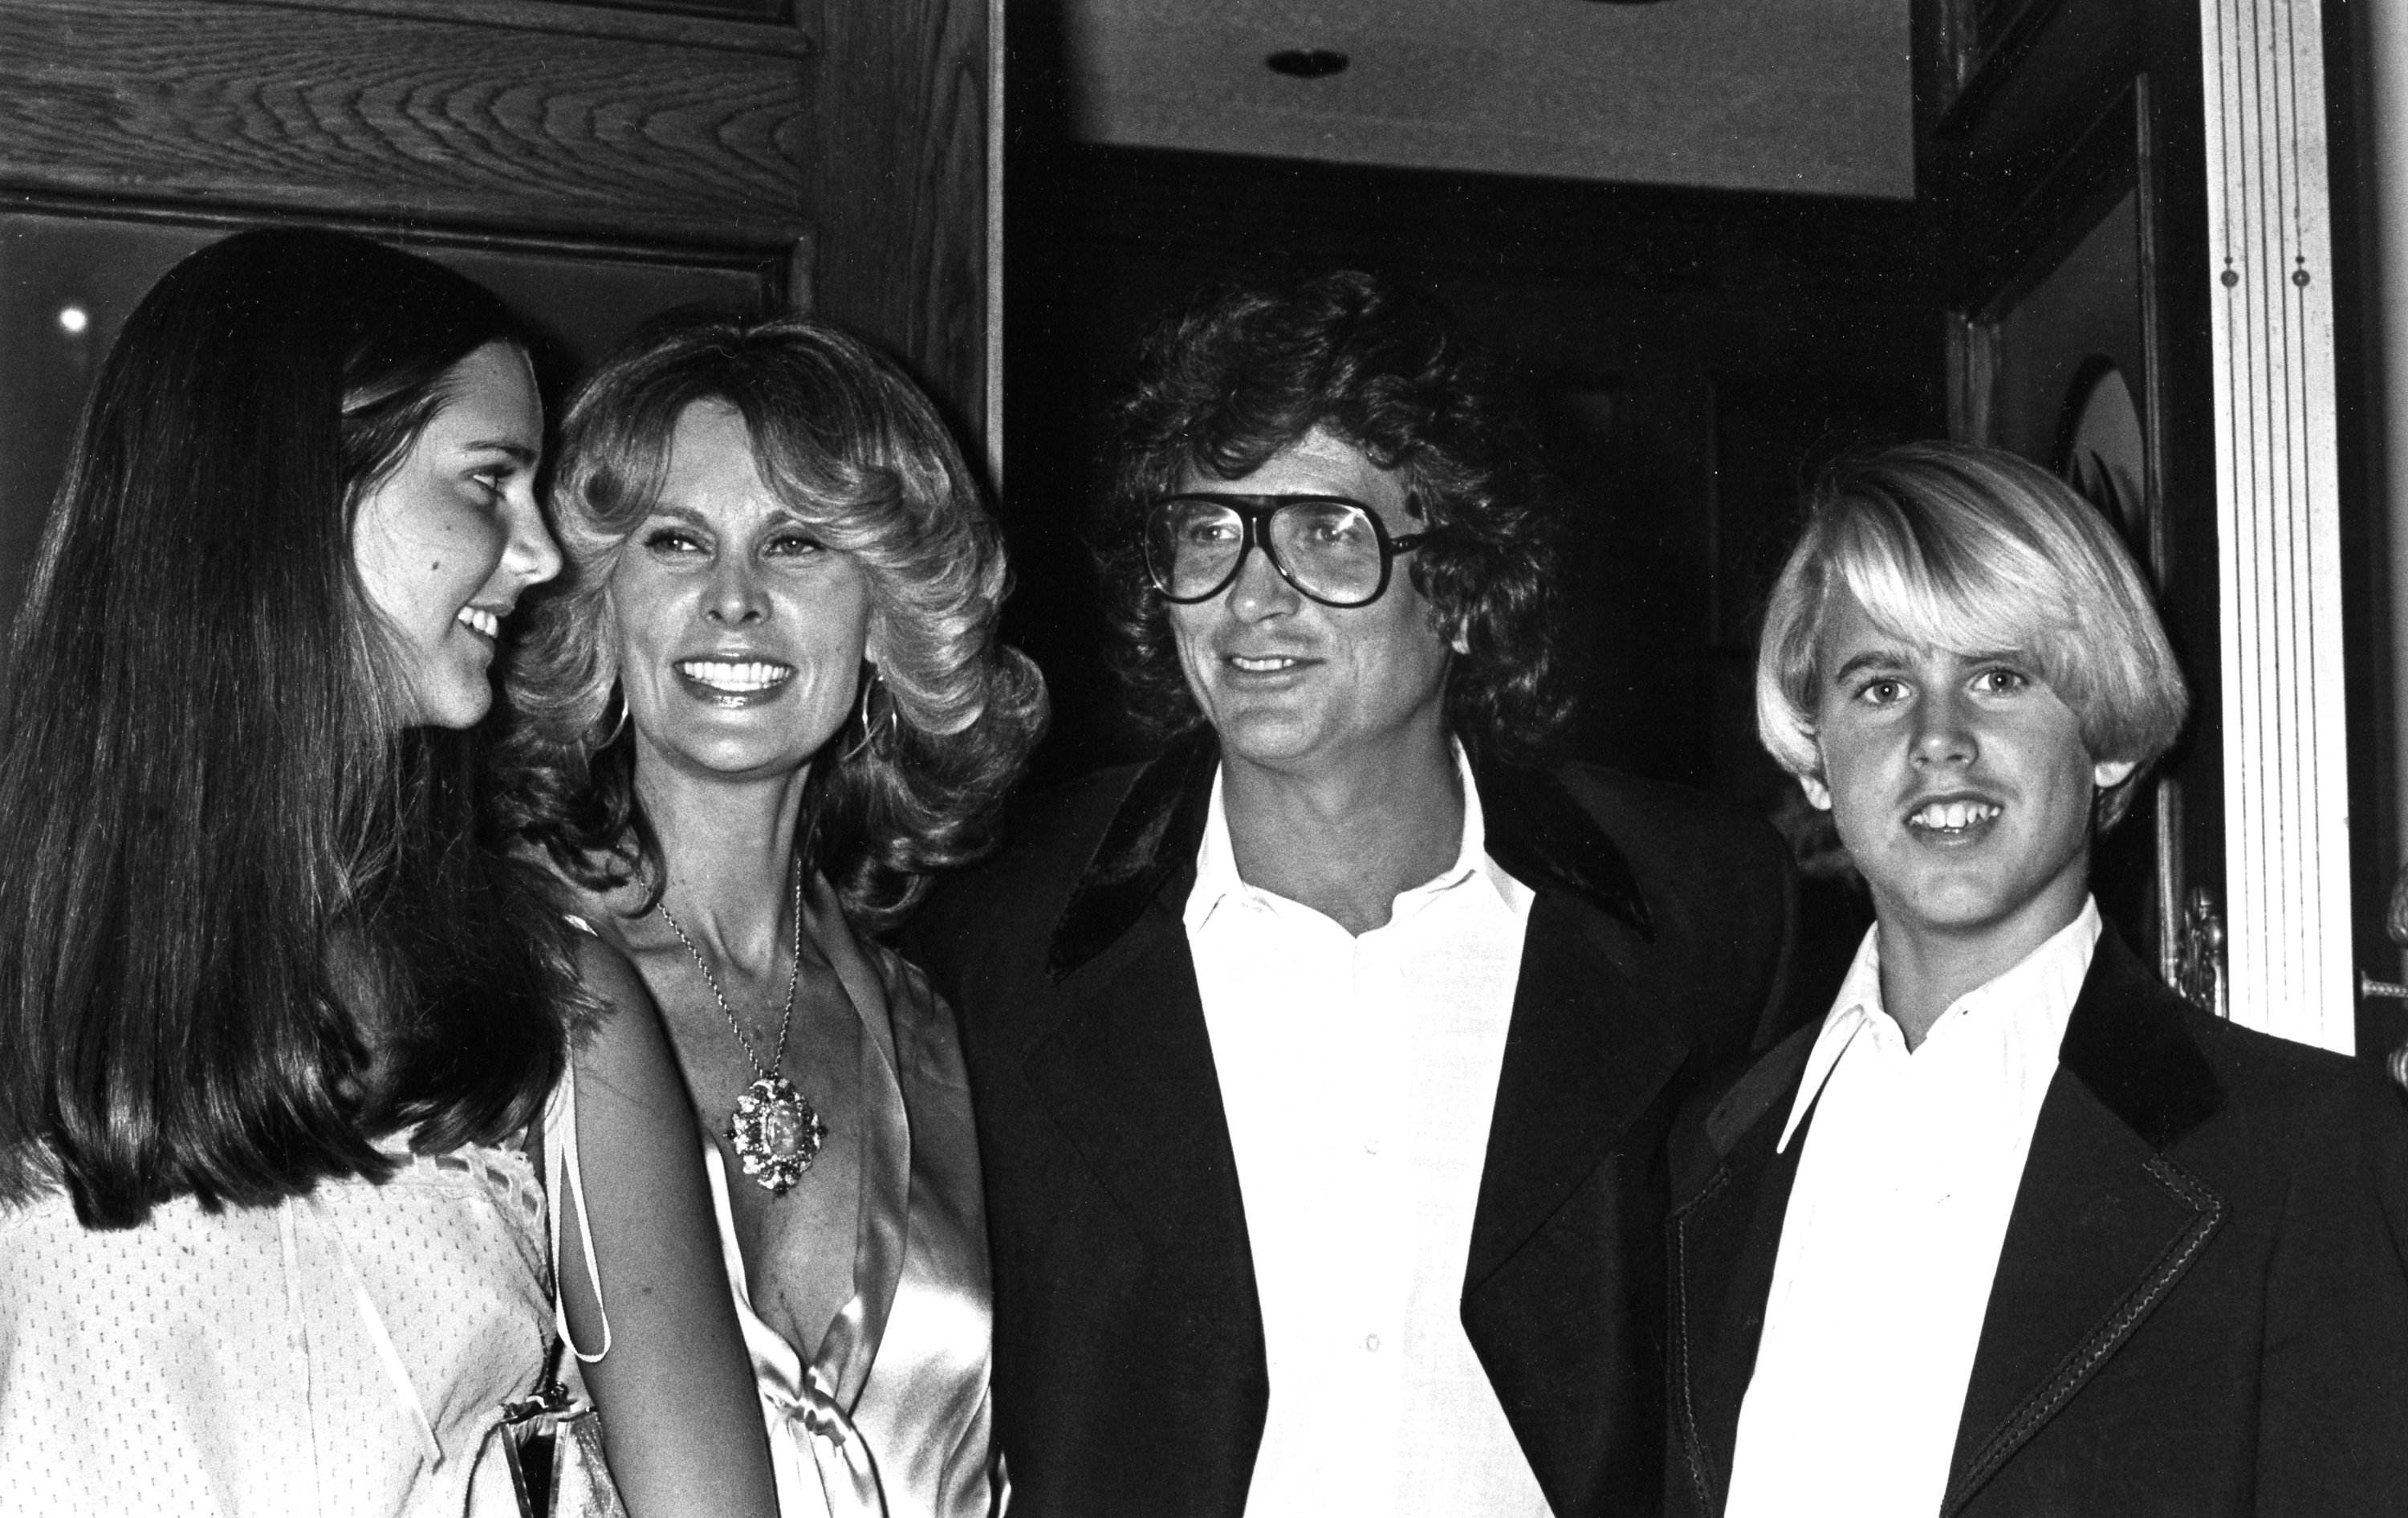 LOS ANGELES - FEBRUARY 20: Actor Michael Landon, wife Lynn Noe, daughter Leslie Landon and son Michael Landon Jr. attend Fourth Annual People's Choice Awards on February 20, 1978 in Los Angeles, California.